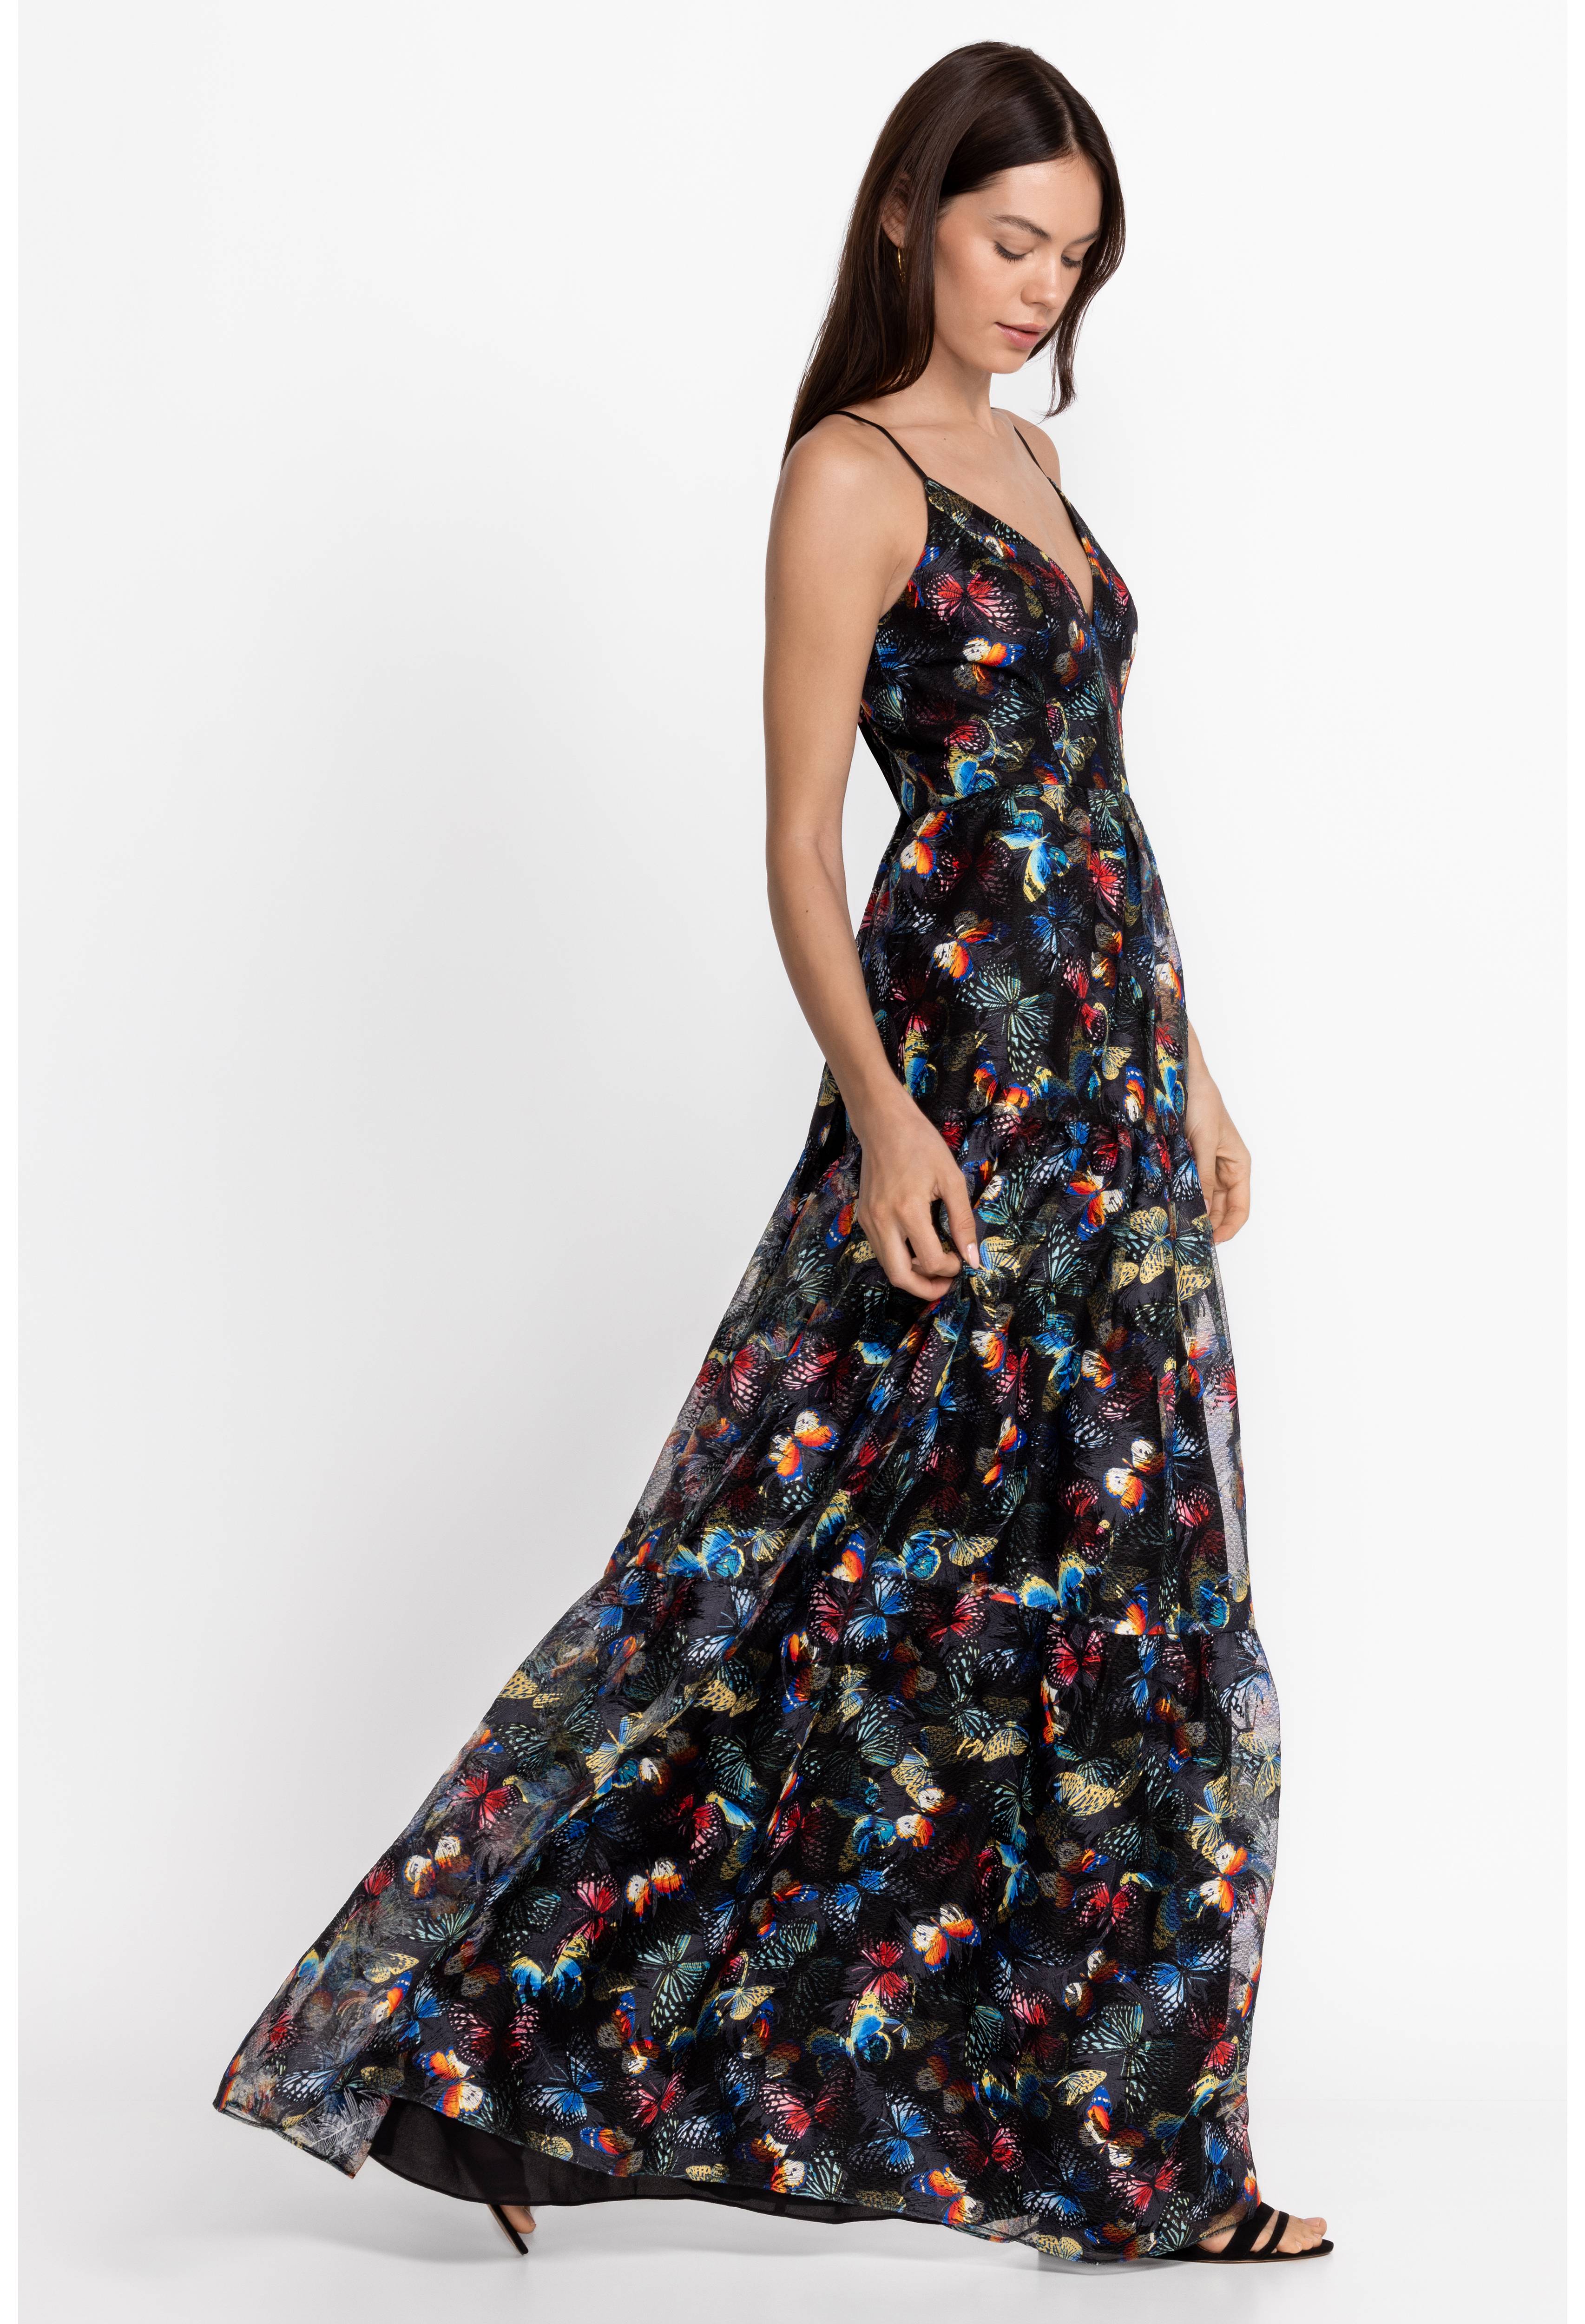 Papillon Embroidered Maxi Dress, , large image number 2